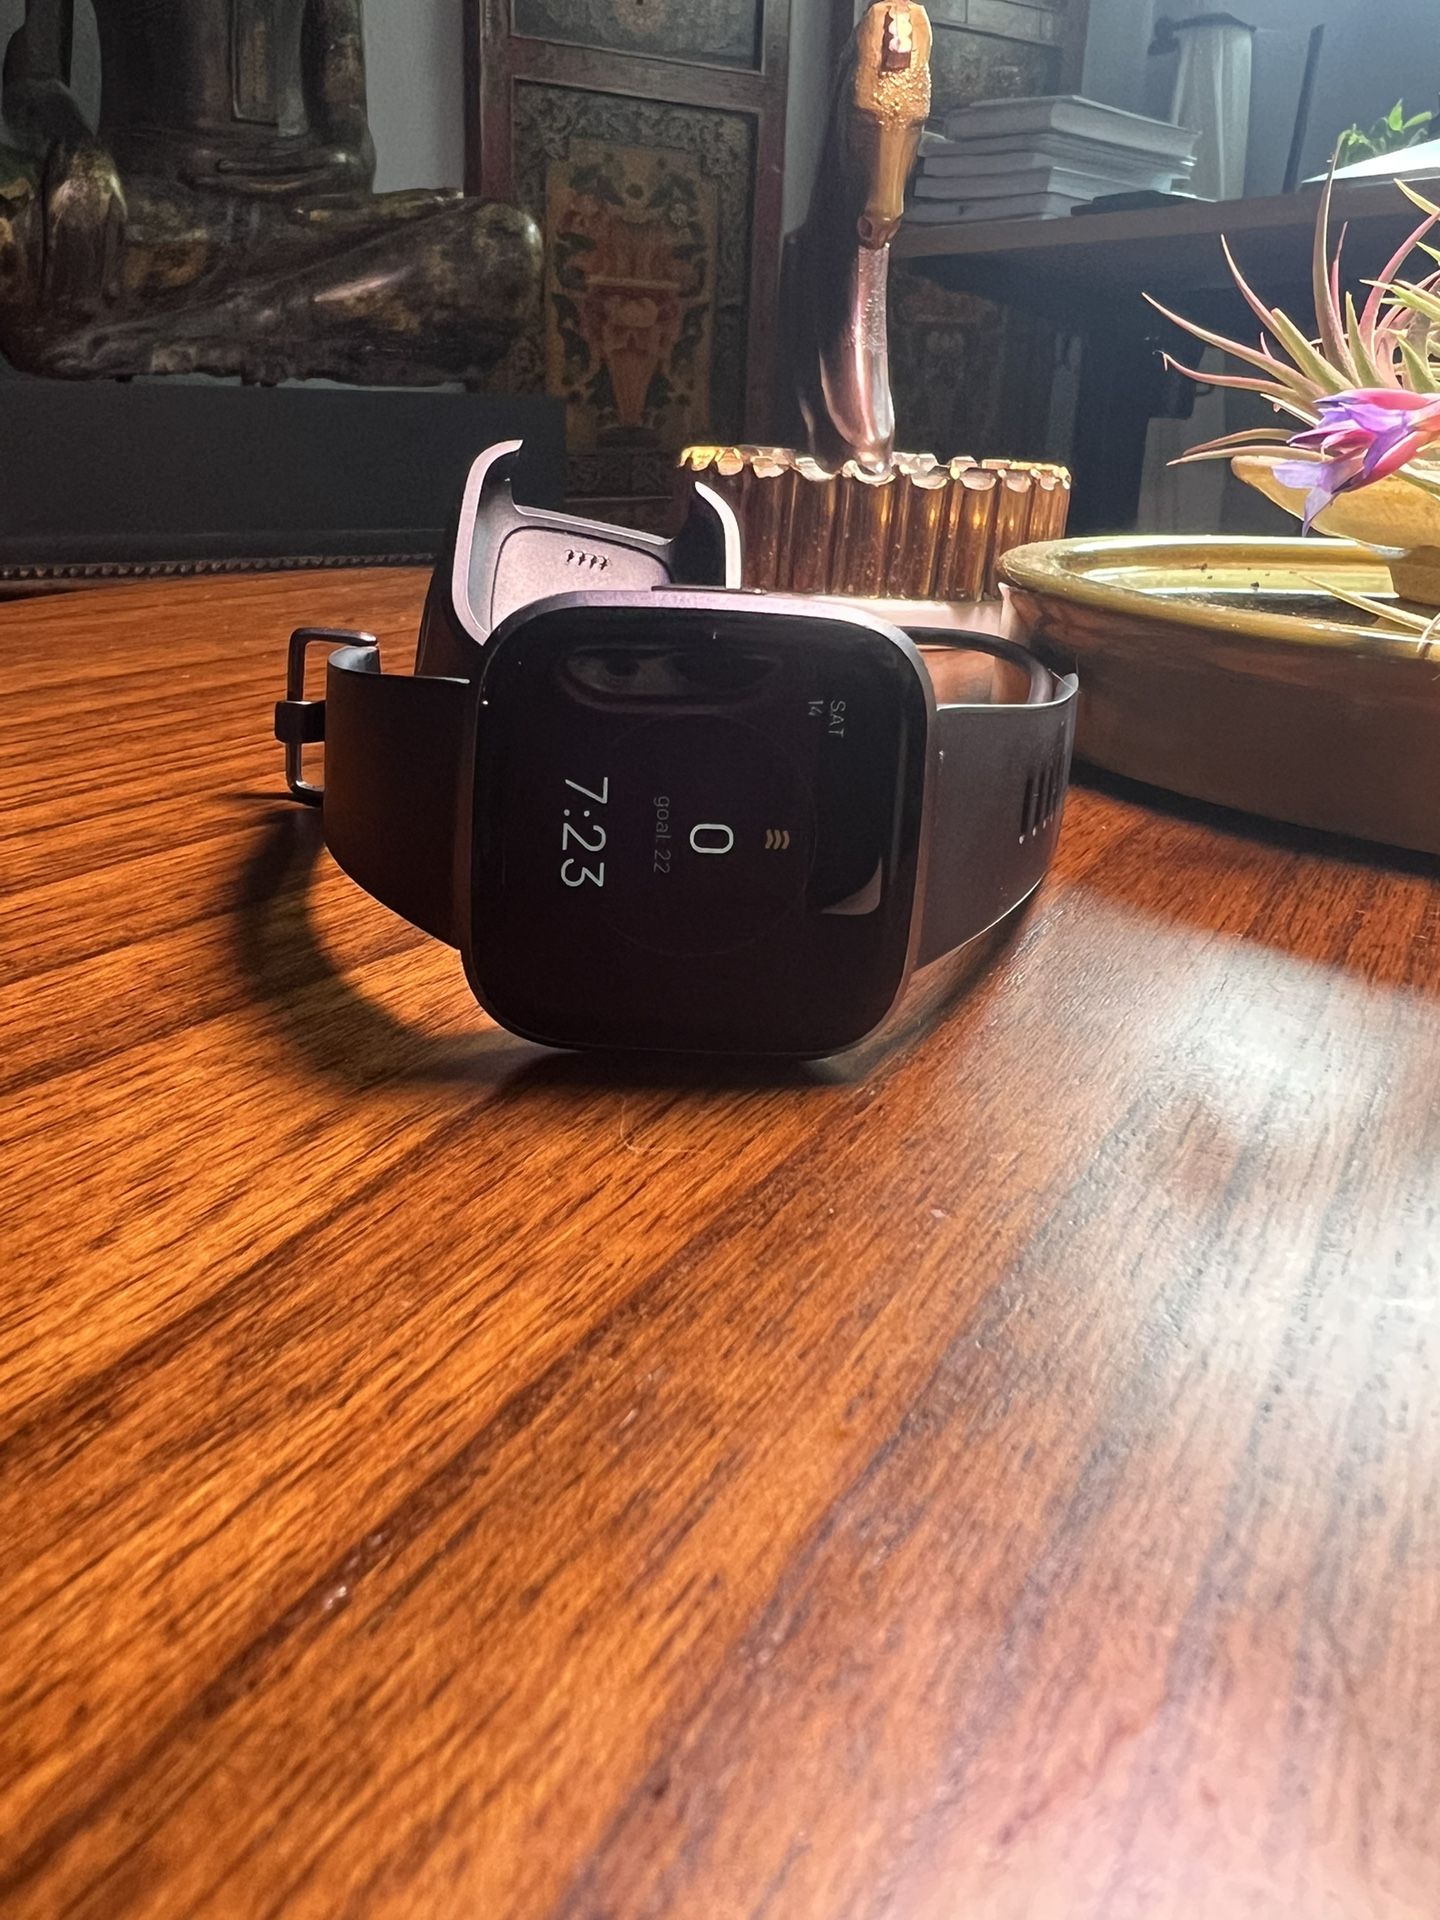 FitBit Versa 2 Health and Fitness Smartwatch 